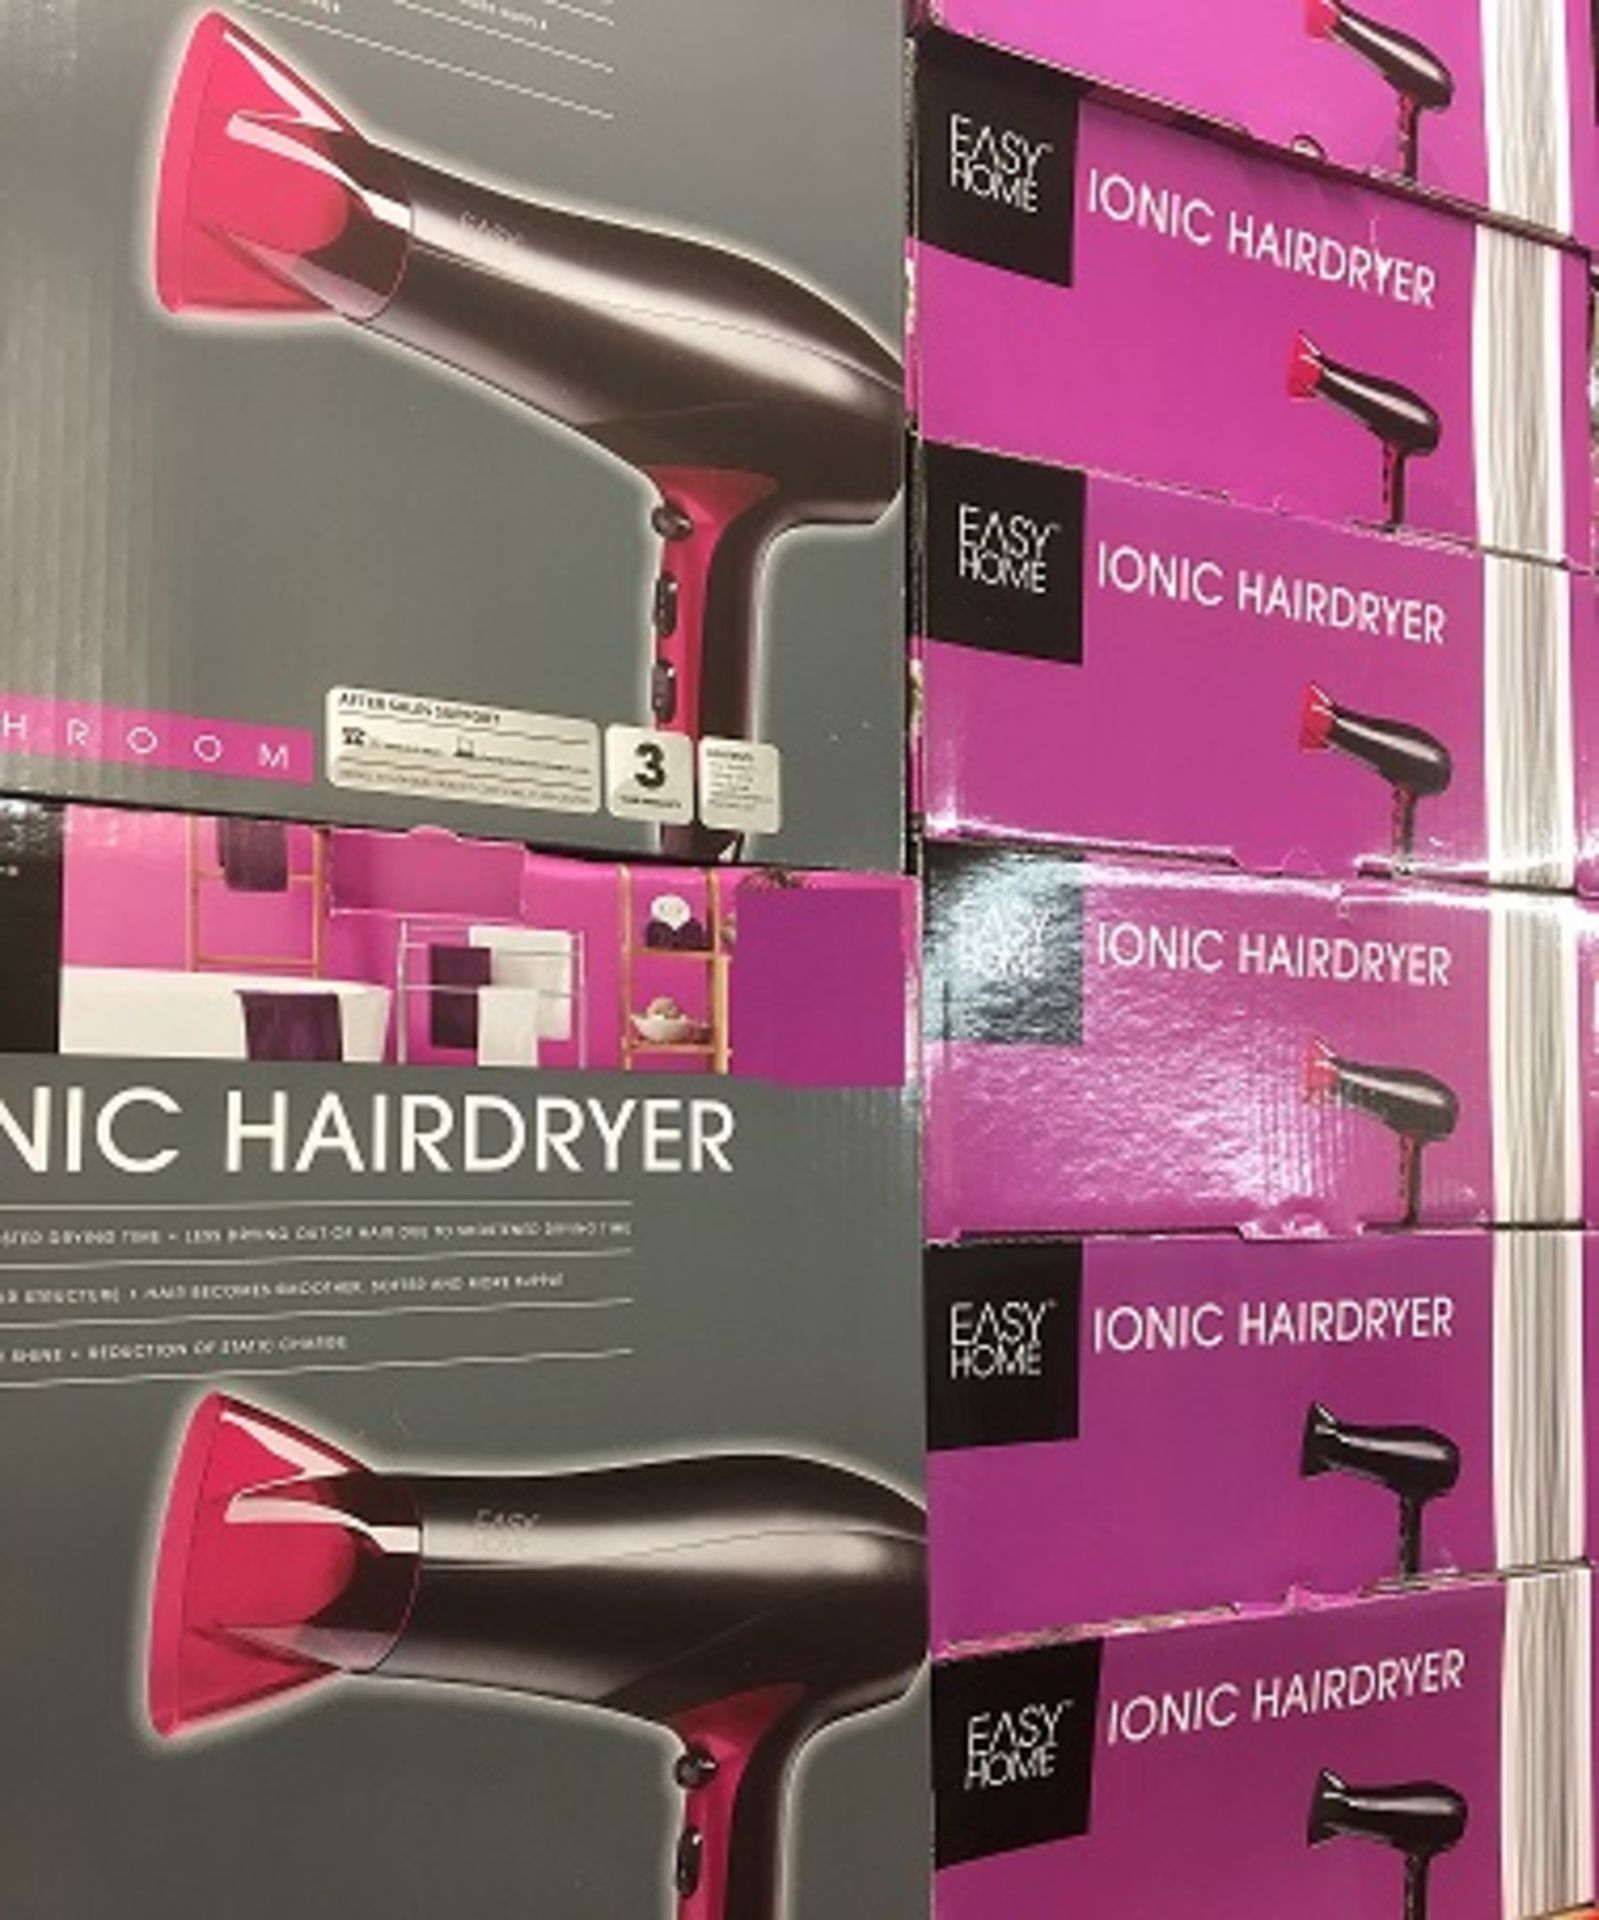 V Brand New Easy Home Ionic Hairdryer-3 Temperature Levels-Directional & Removable Styling Nozzle- - Image 2 of 2